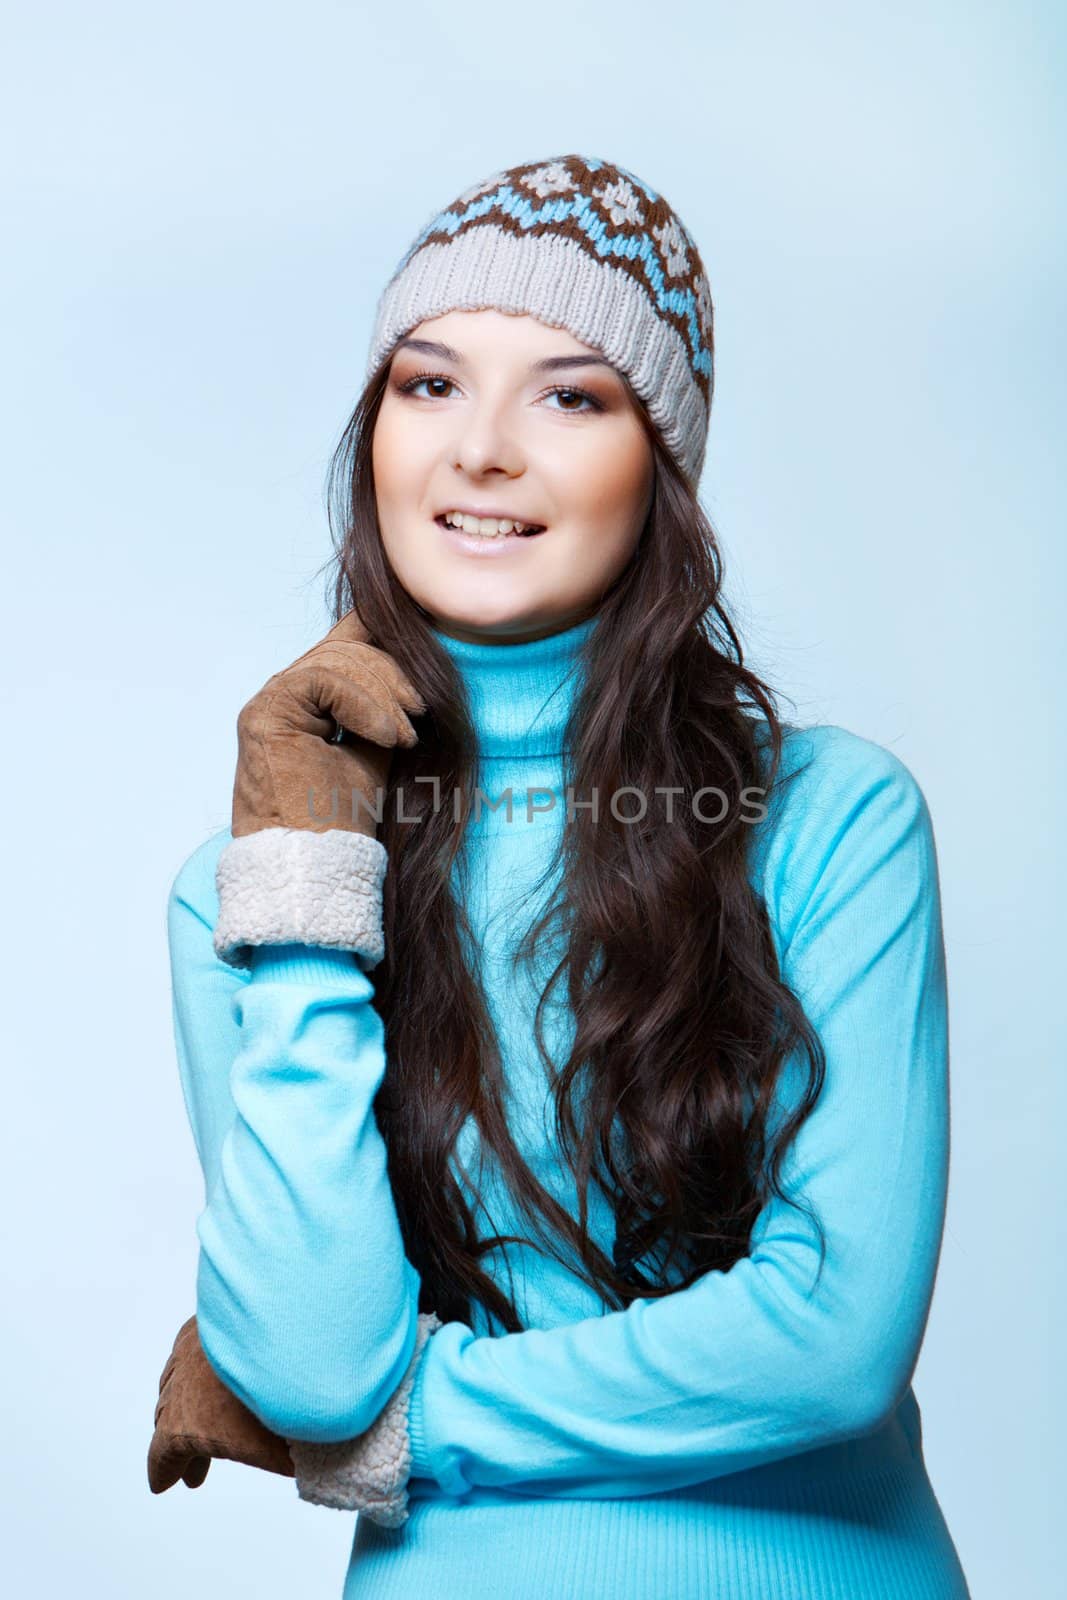 smiling woman in cap and mittens on blue background